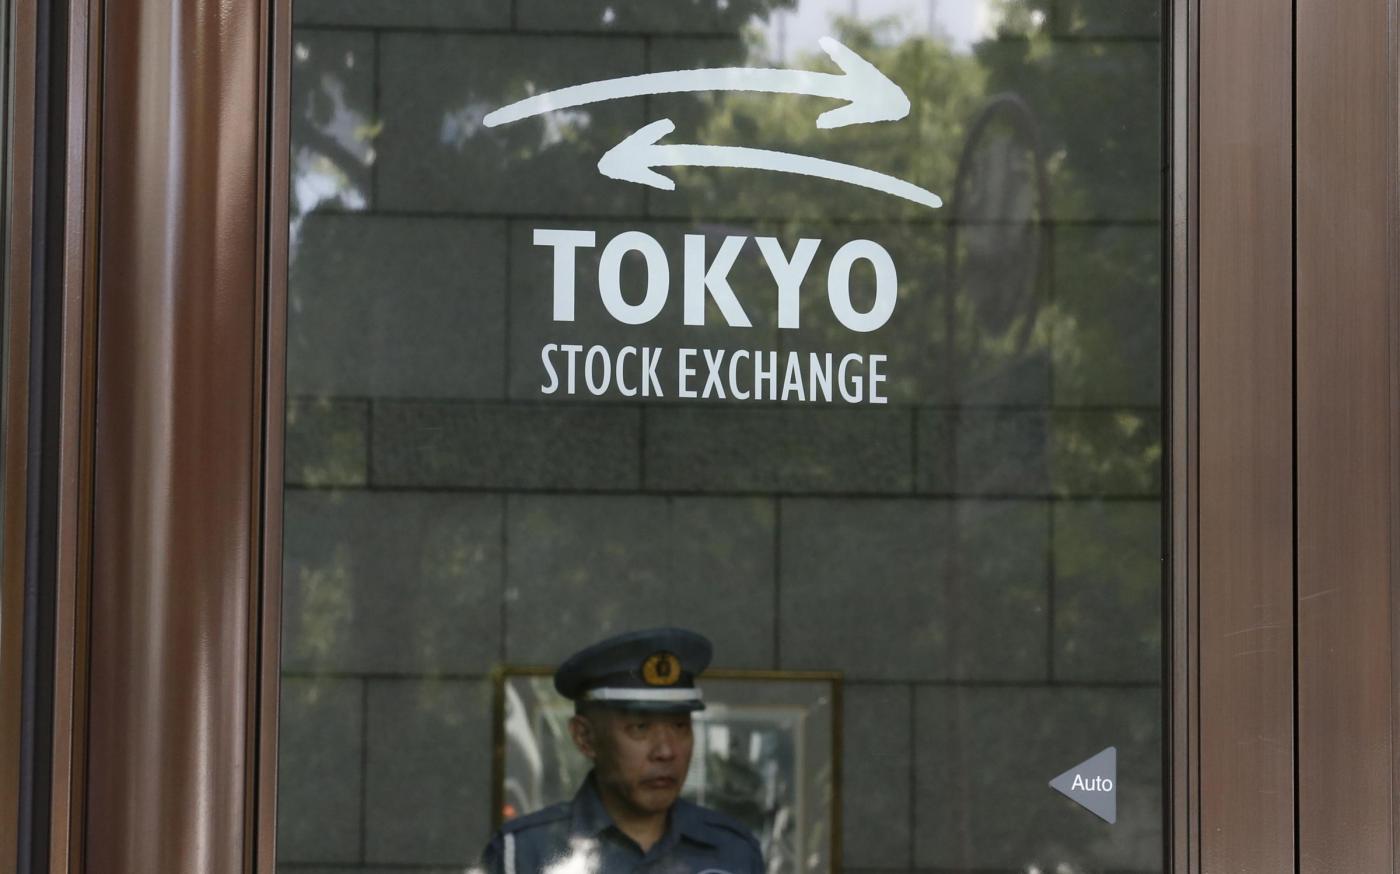 Tokyo stock market closes on a positive note after the Bank of Japan’s announcement